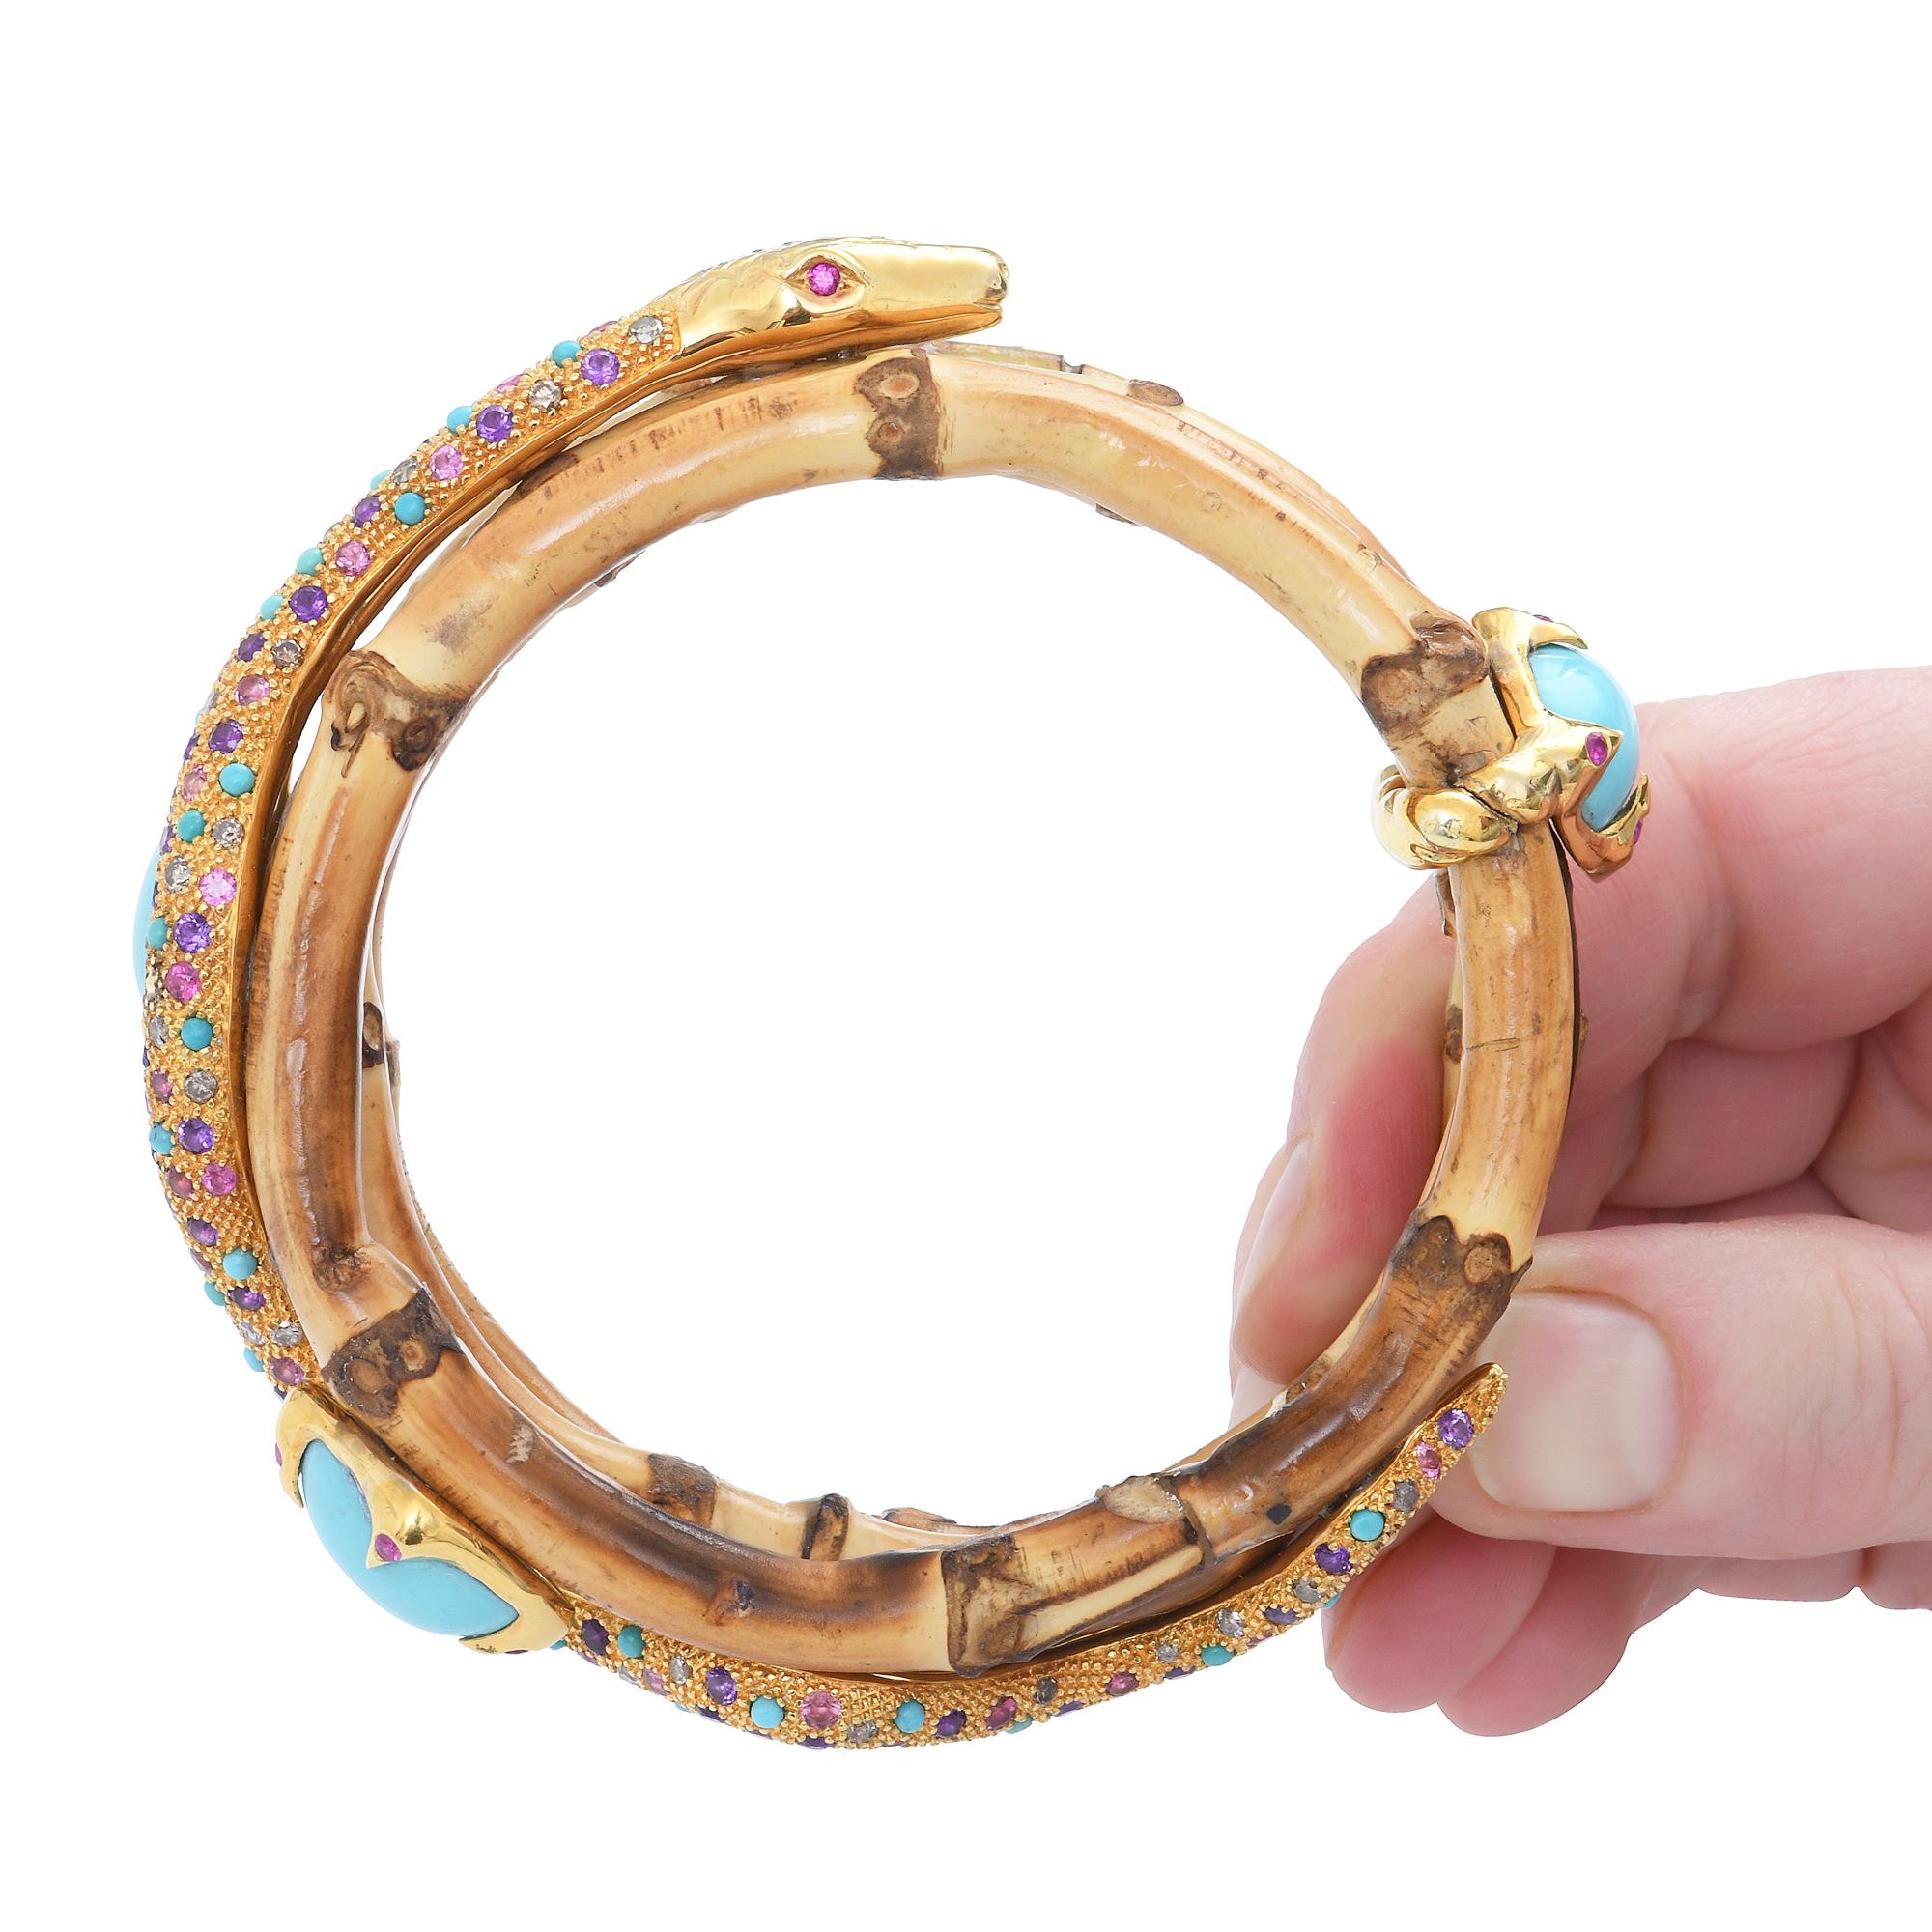 Contemporary Sylvie Corbelin, One of a Kind Bamboo and Vermeil Bracelet